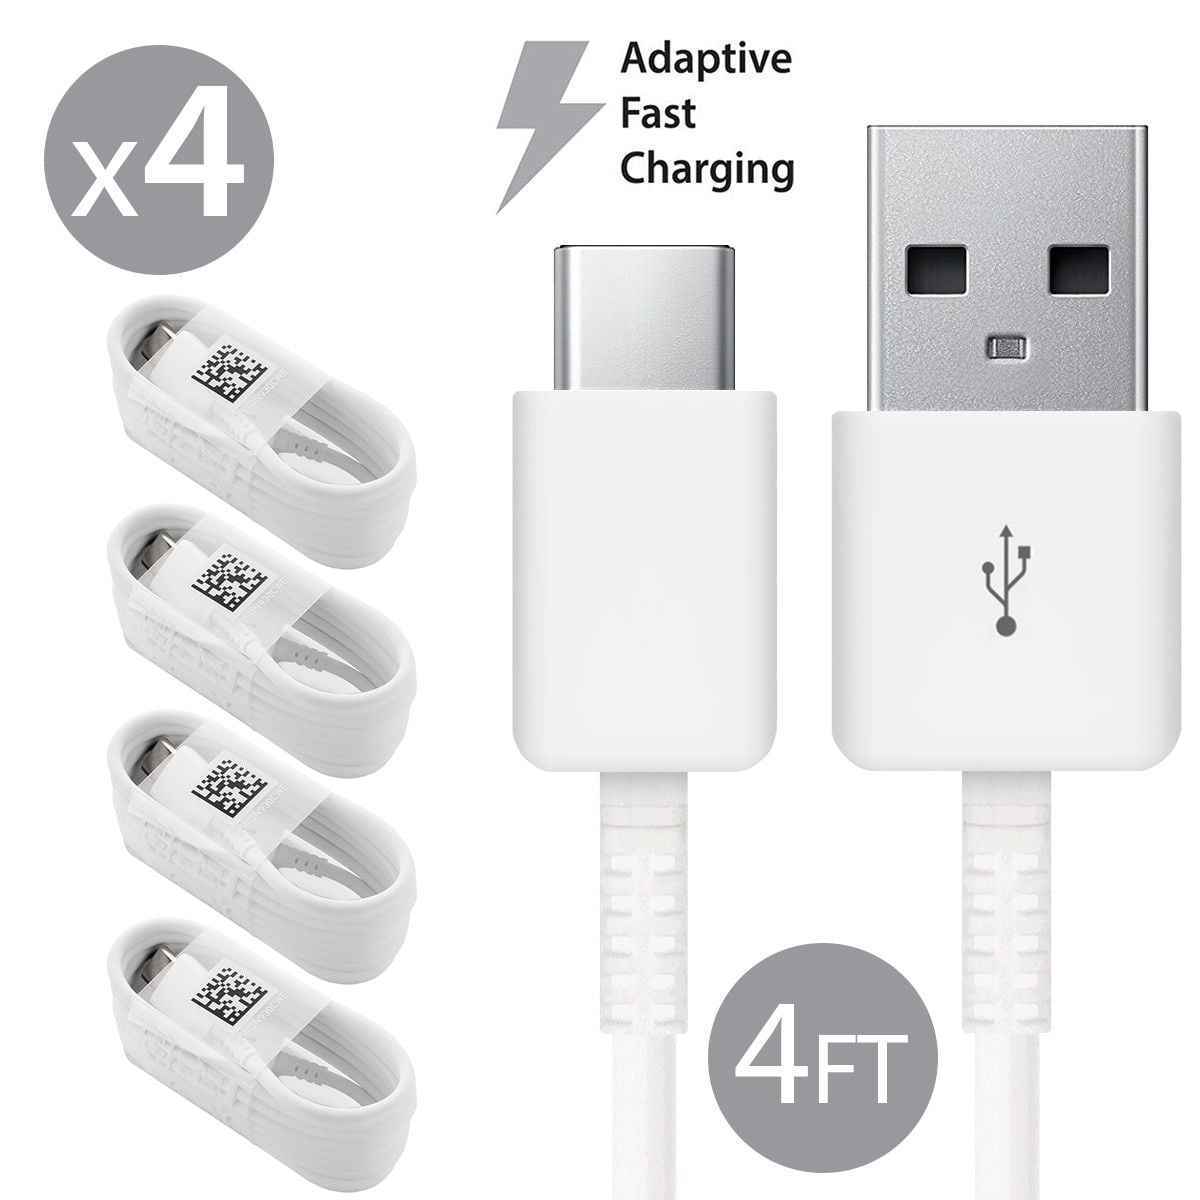 4 Pack Afflux USB Type C USB-C Fast Charging Cable USB-C 3.1 Data Sync Charger Cord For Samsung Galaxy S8 S8+ S9 S9+ Galaxy Note 8 9 Nexus 5X 6P OnePlus 3t 5 5t LG G5 G6 V20 V30 Google Pixel 2 2XL 4FT